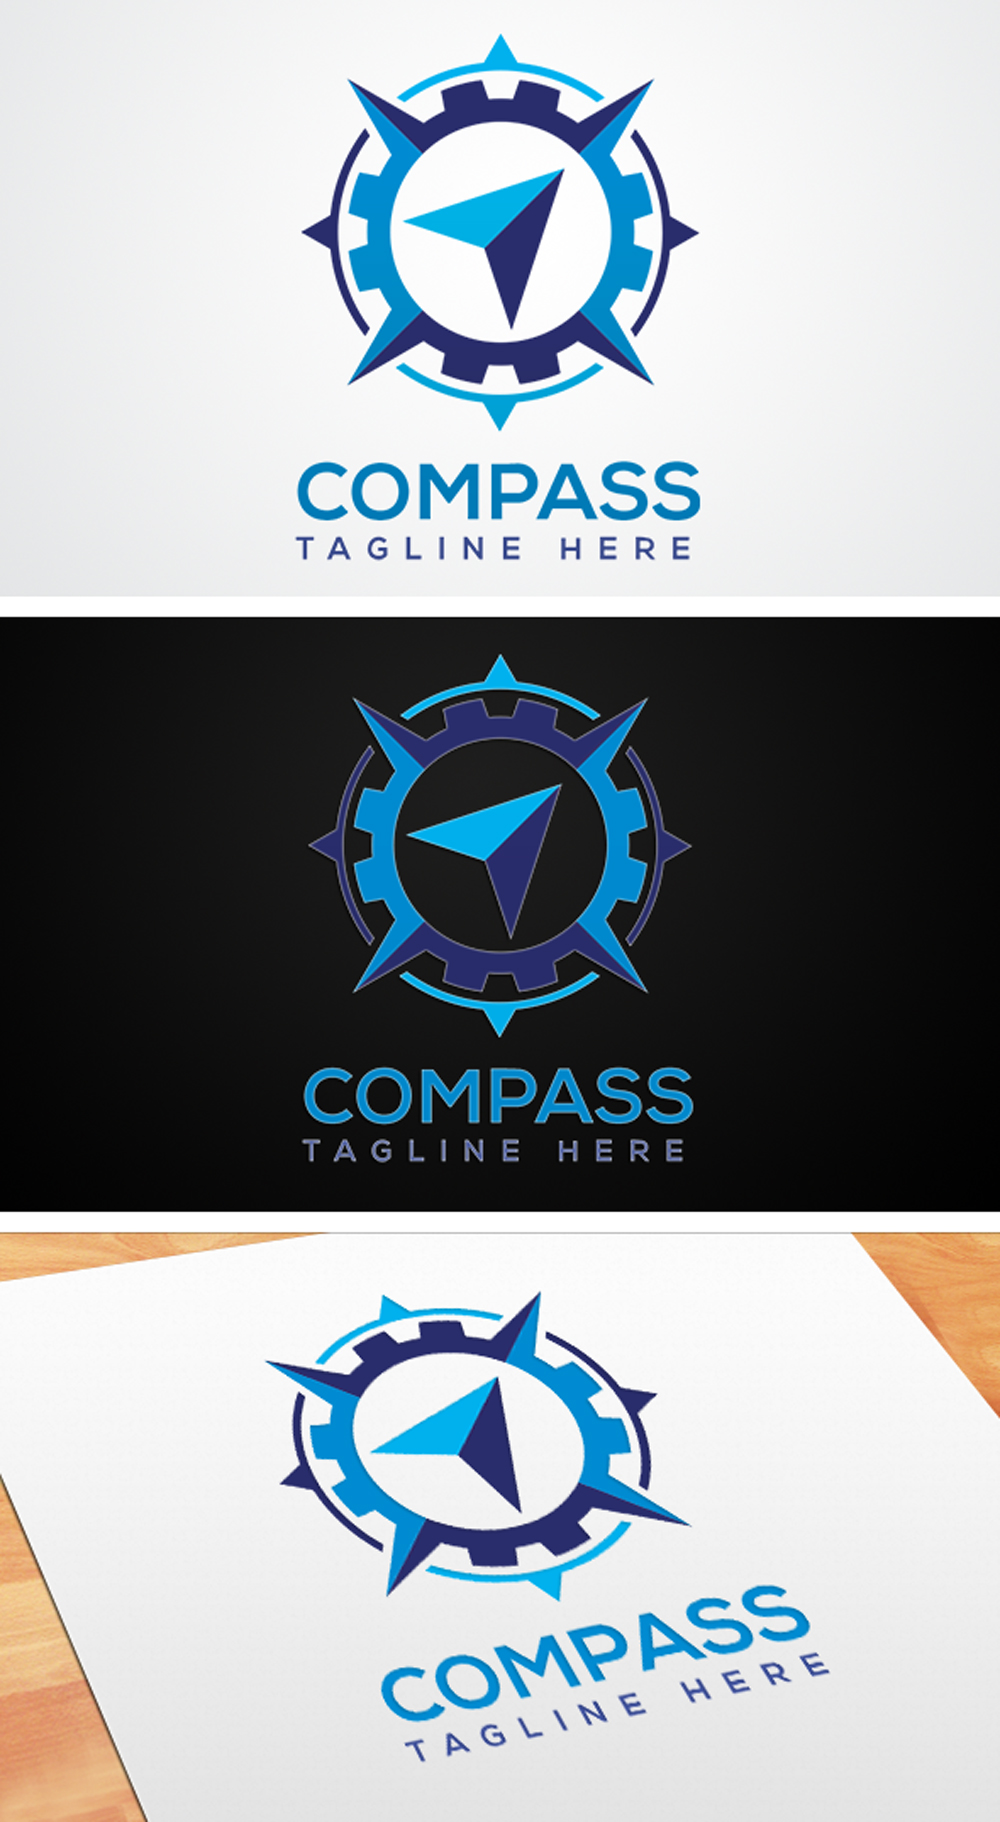 A selection of images of colorful round logos in the form of a compass.